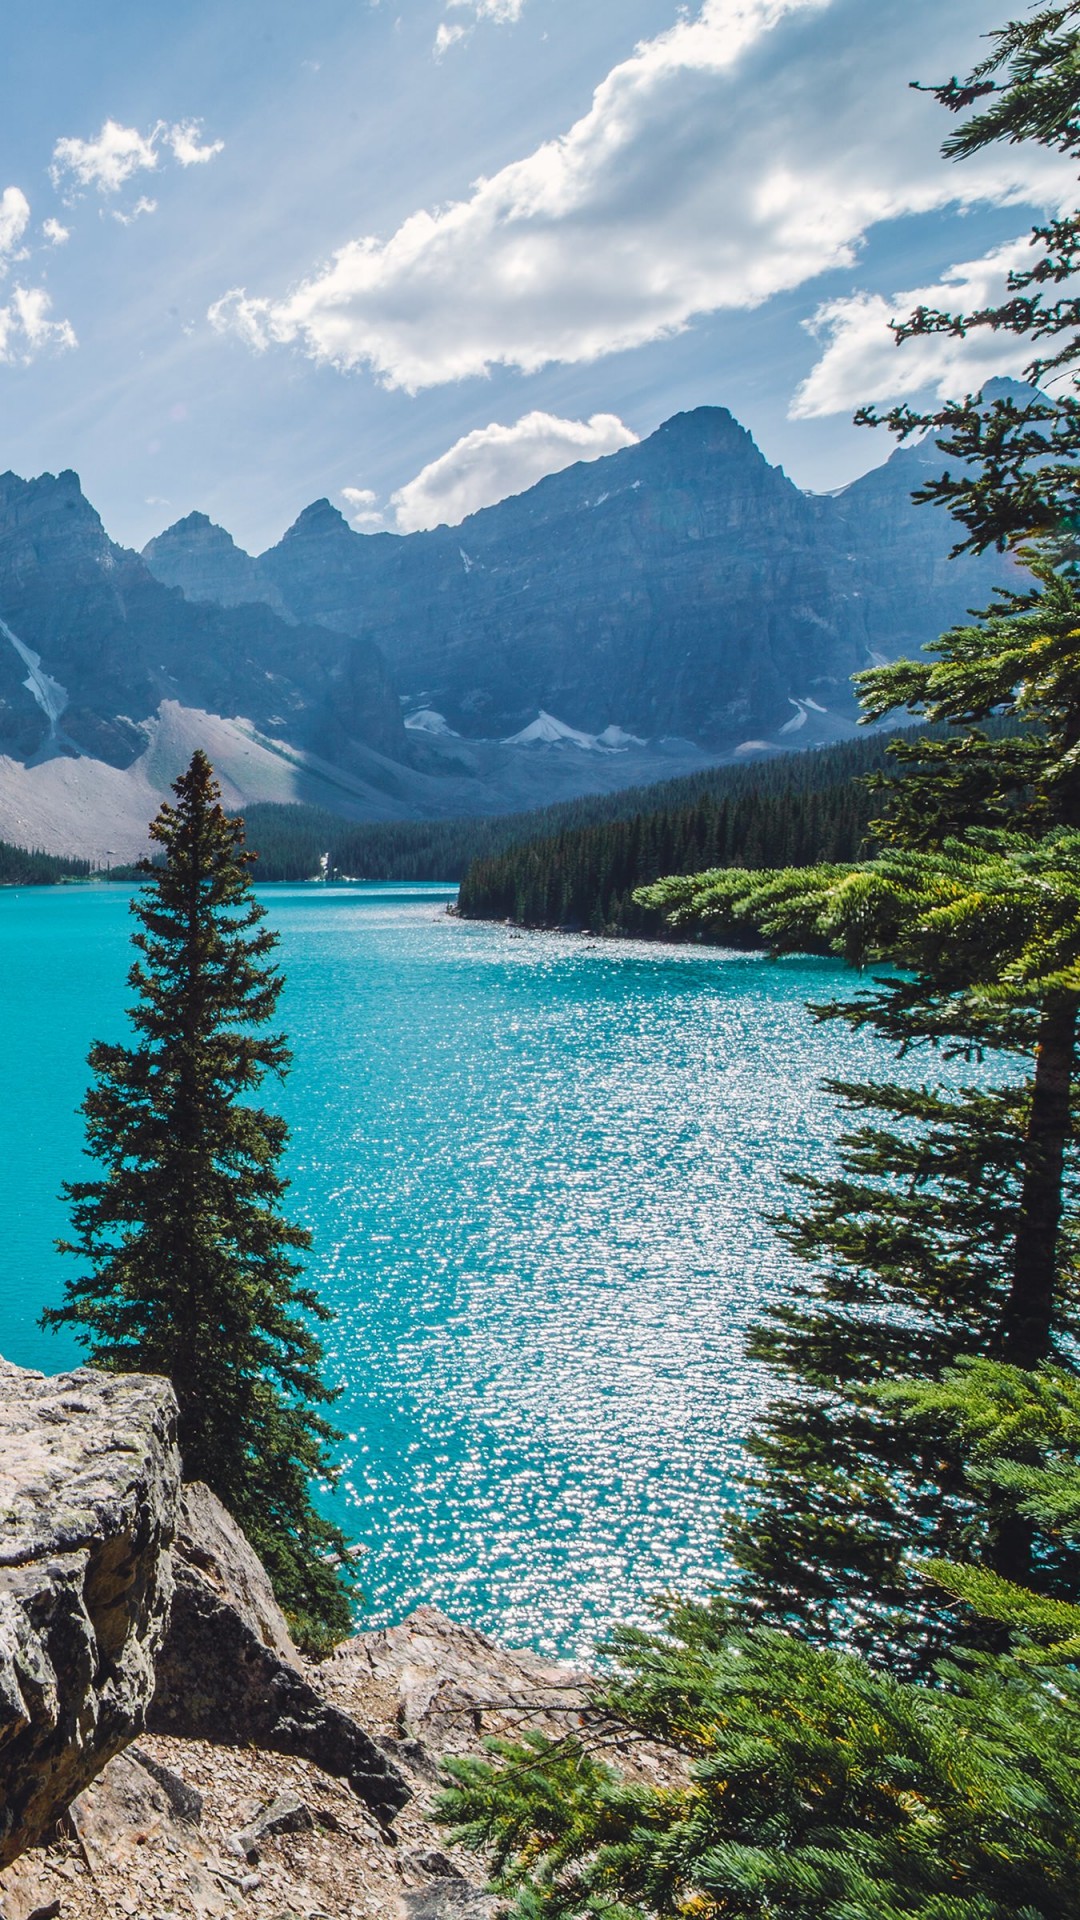 Sunny day over Moraine Lake Wallpaper for SONY Xperia Z1